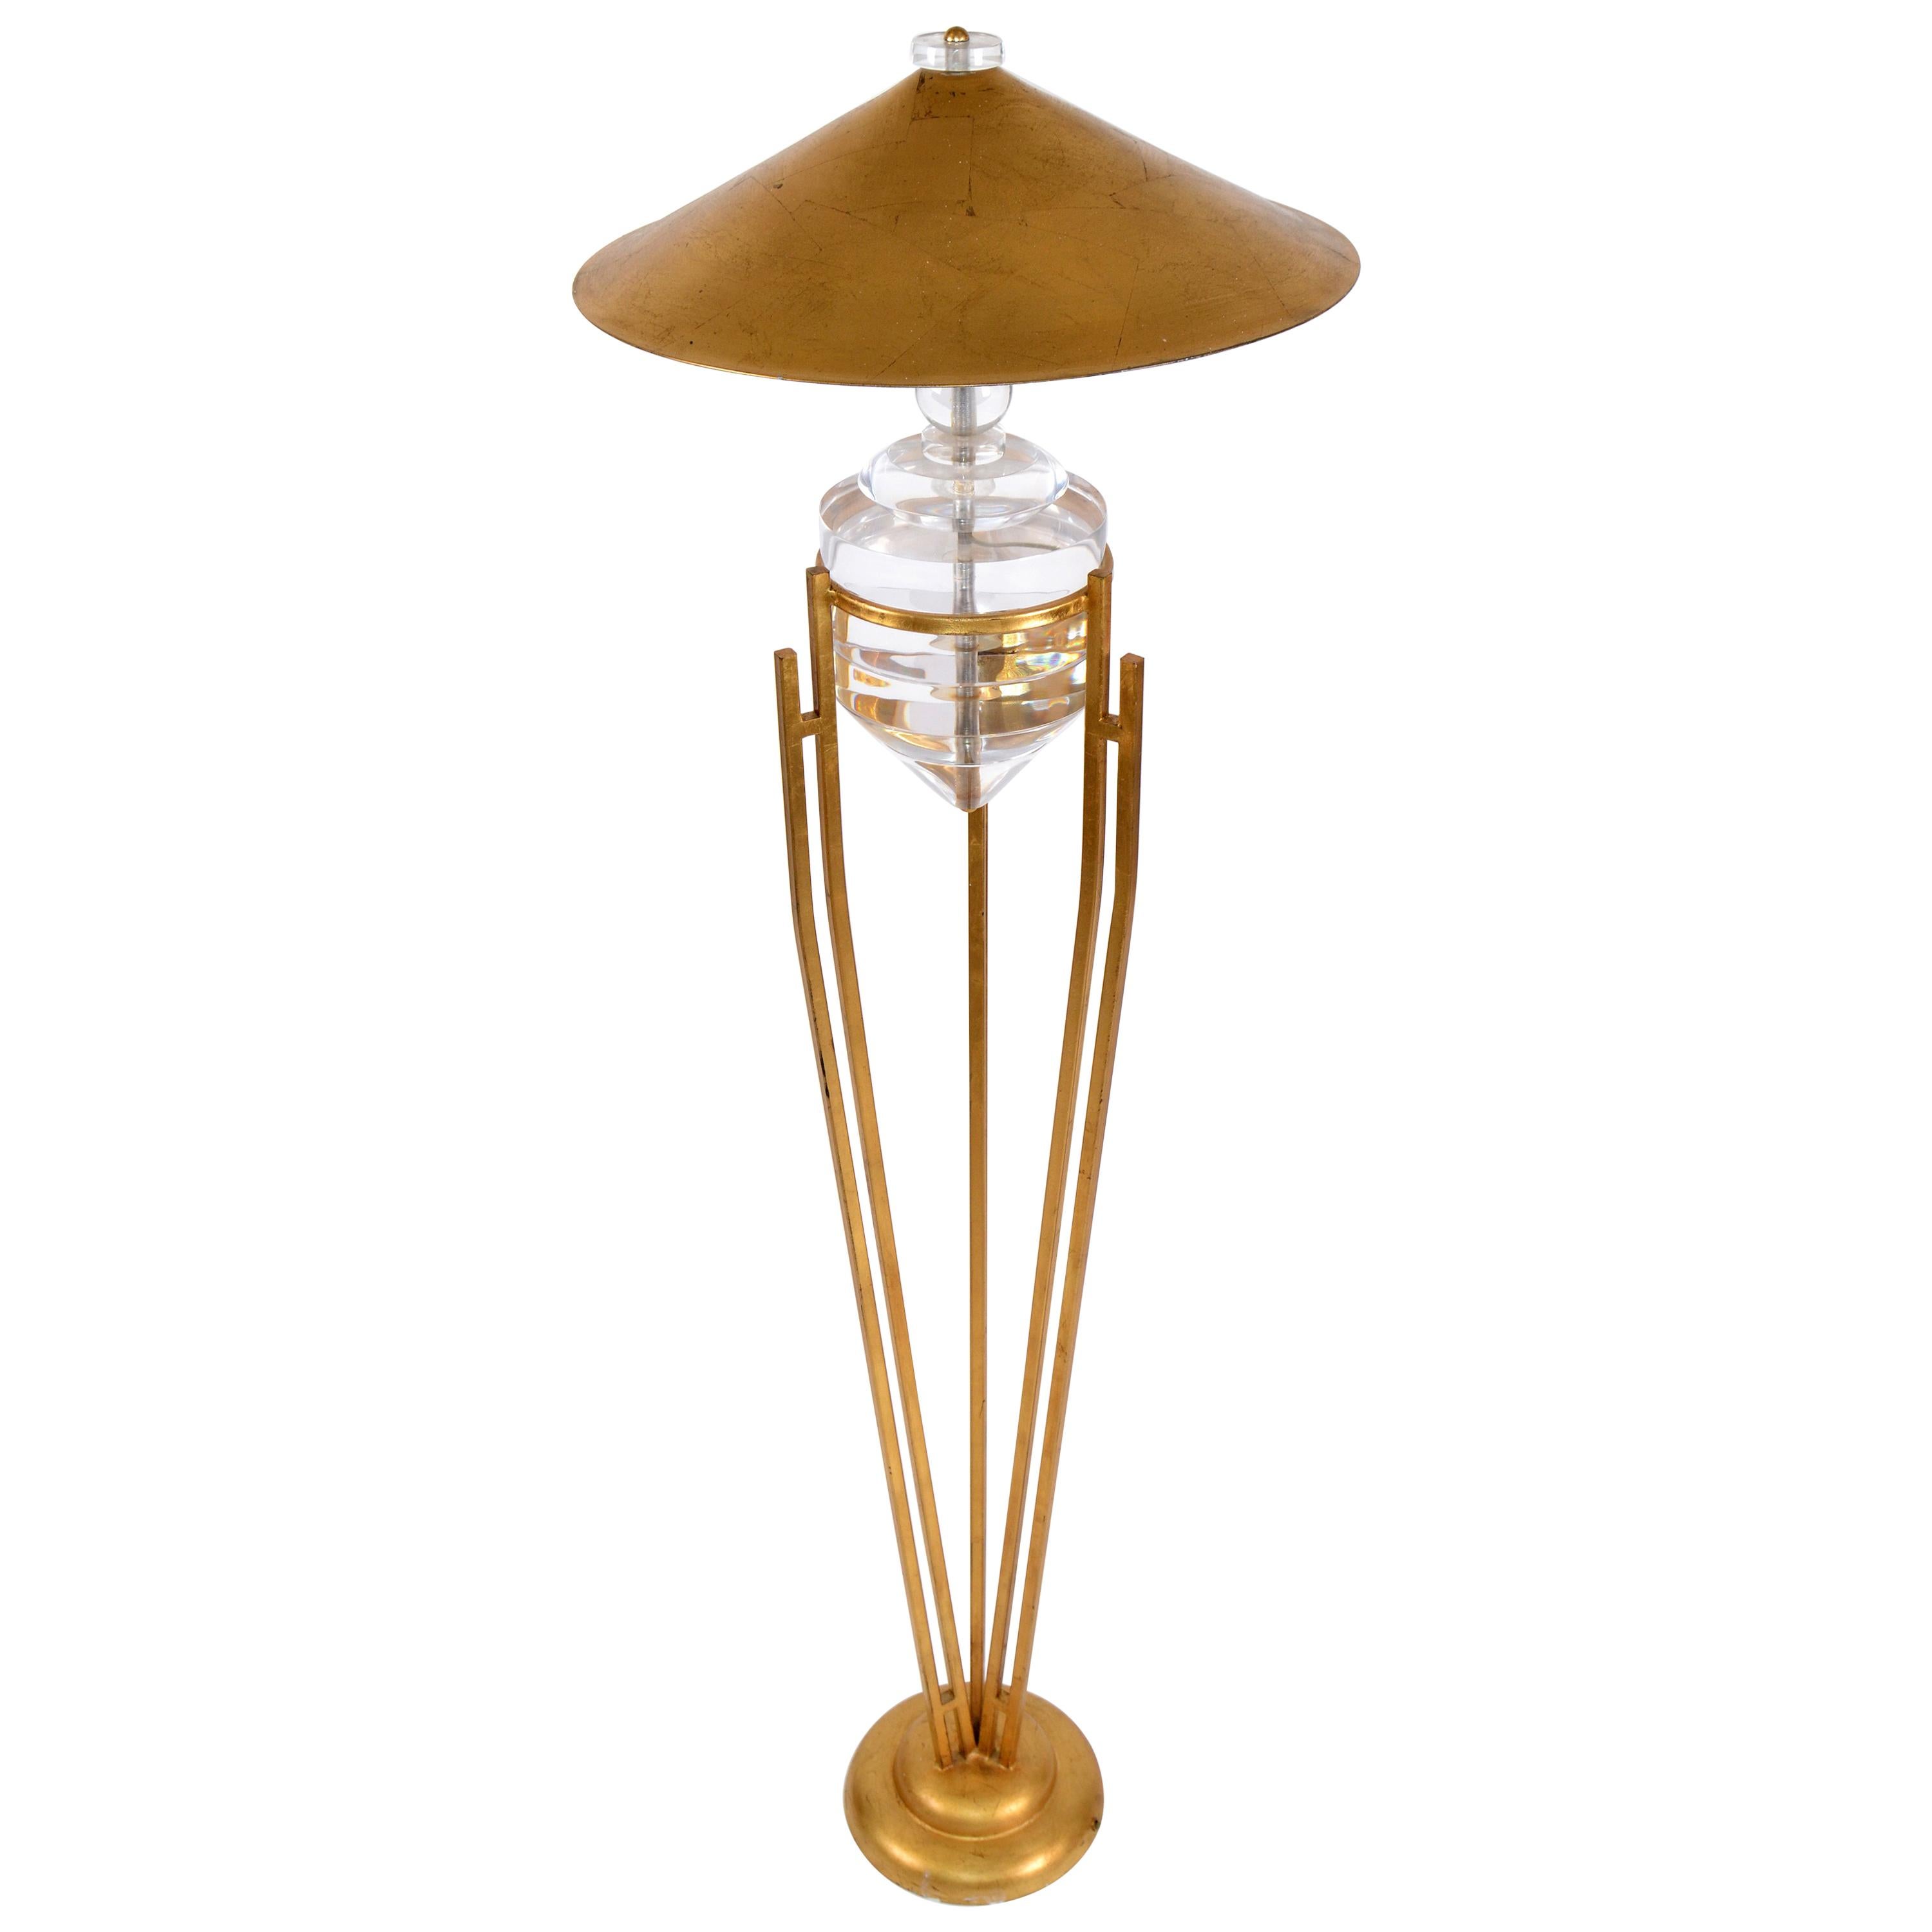 Art Deco Style Brass Metal and Stacked Lucite Module Floor Lamp Golden Shade